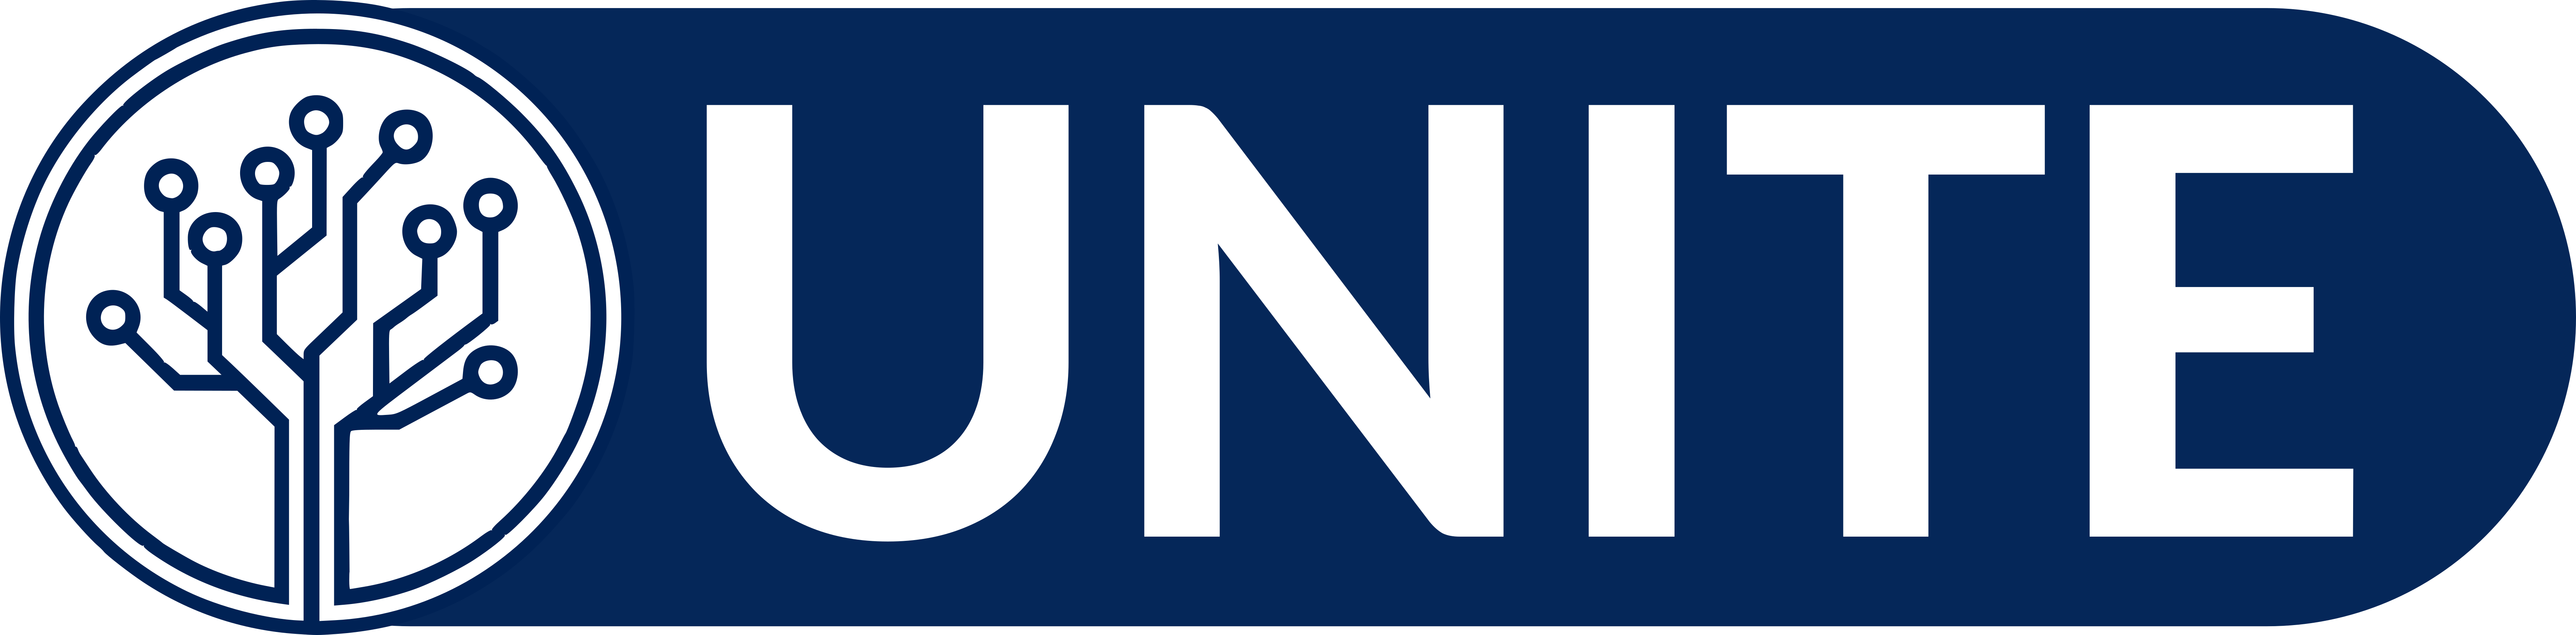 Union of IT and ITES Employees (UNITE) Logo